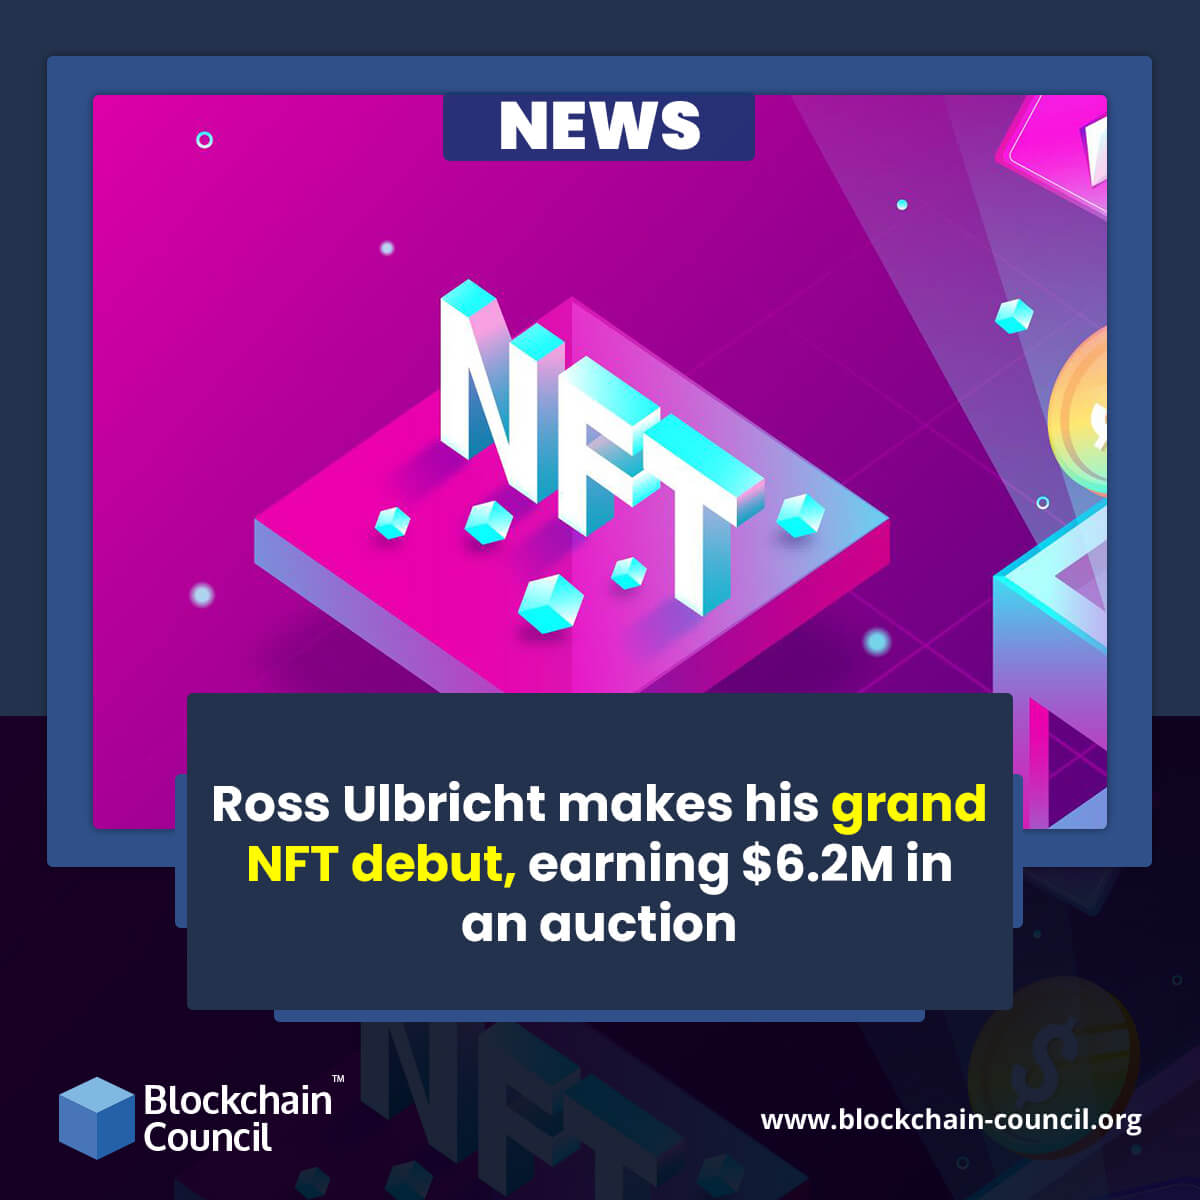 Ross Ulbricht makes his grand NFT debut, earning $6.2M in an auction